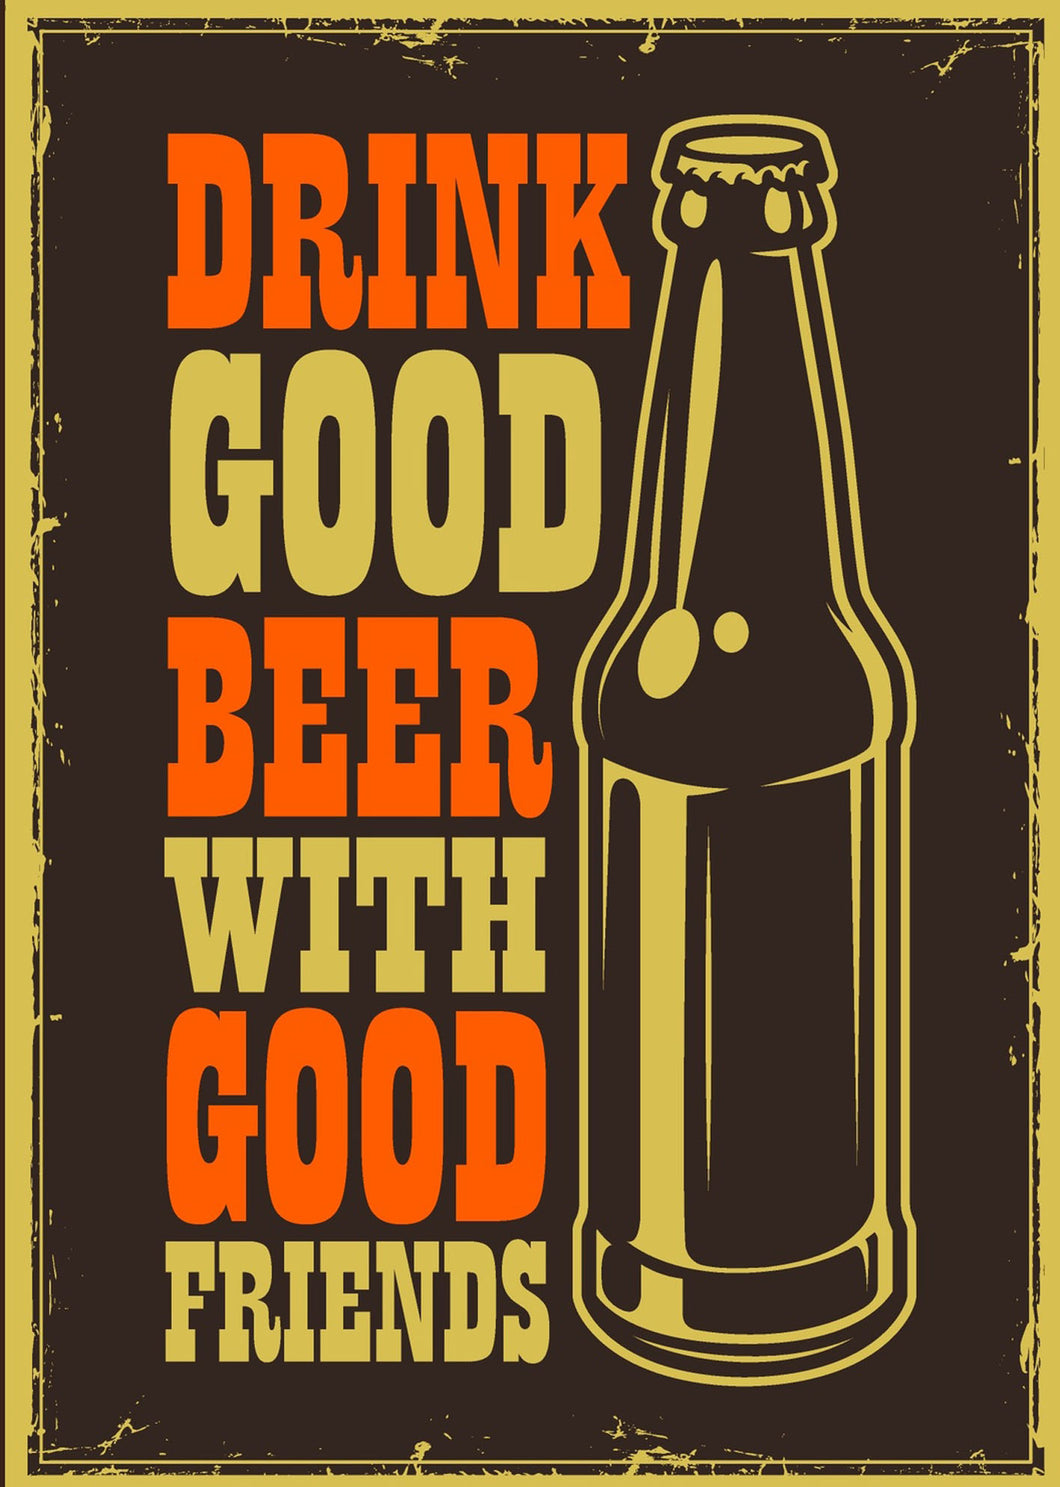 Retro Aluminum Bar Sign - Drink Good Beer with Good Friends